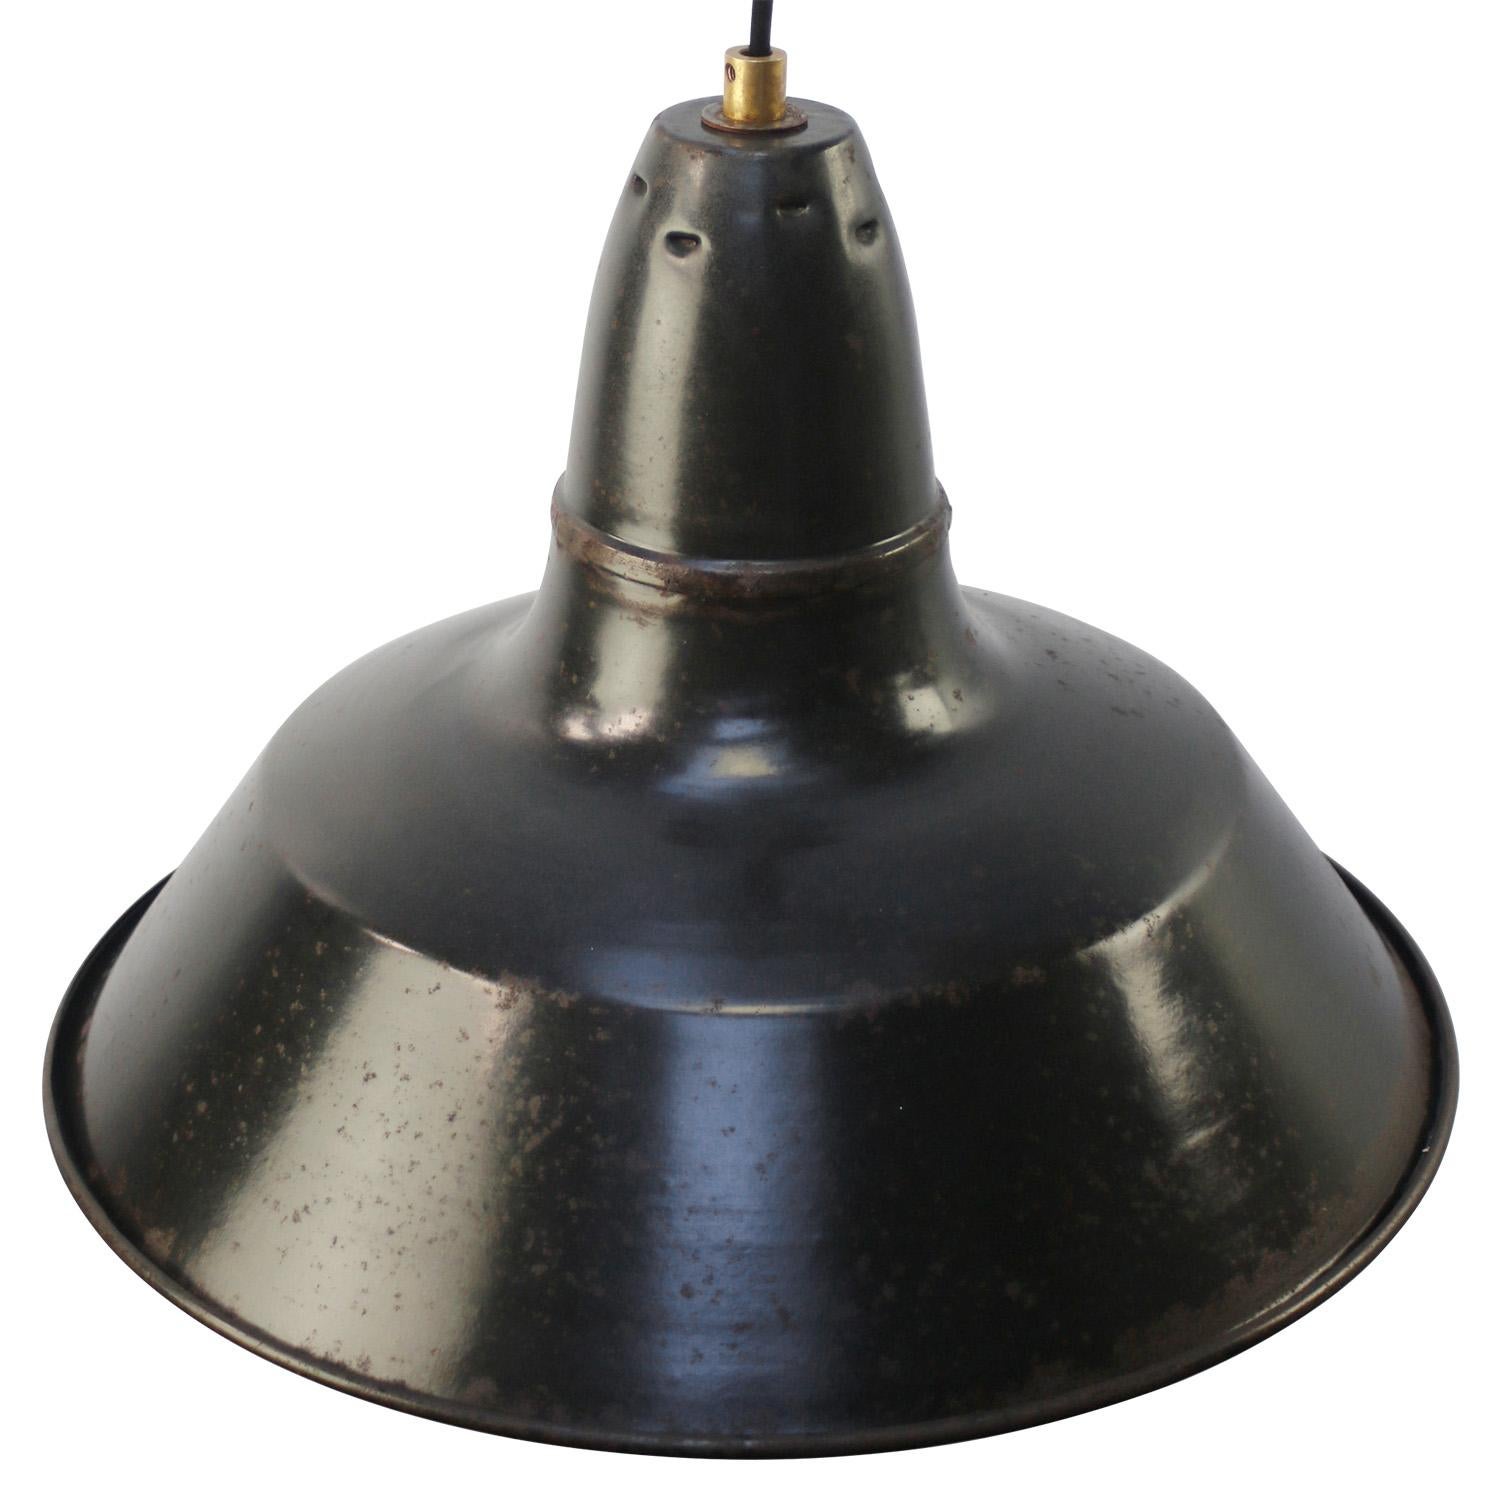 French black / blue Industrial pendant lamp.
Used in warehouses and factories in France and Belgium. 

Weight: 1.90 kg / 4.2 lb

Priced per individual item. All lamps have been made suitable by international standards for incandescent light bulbs,